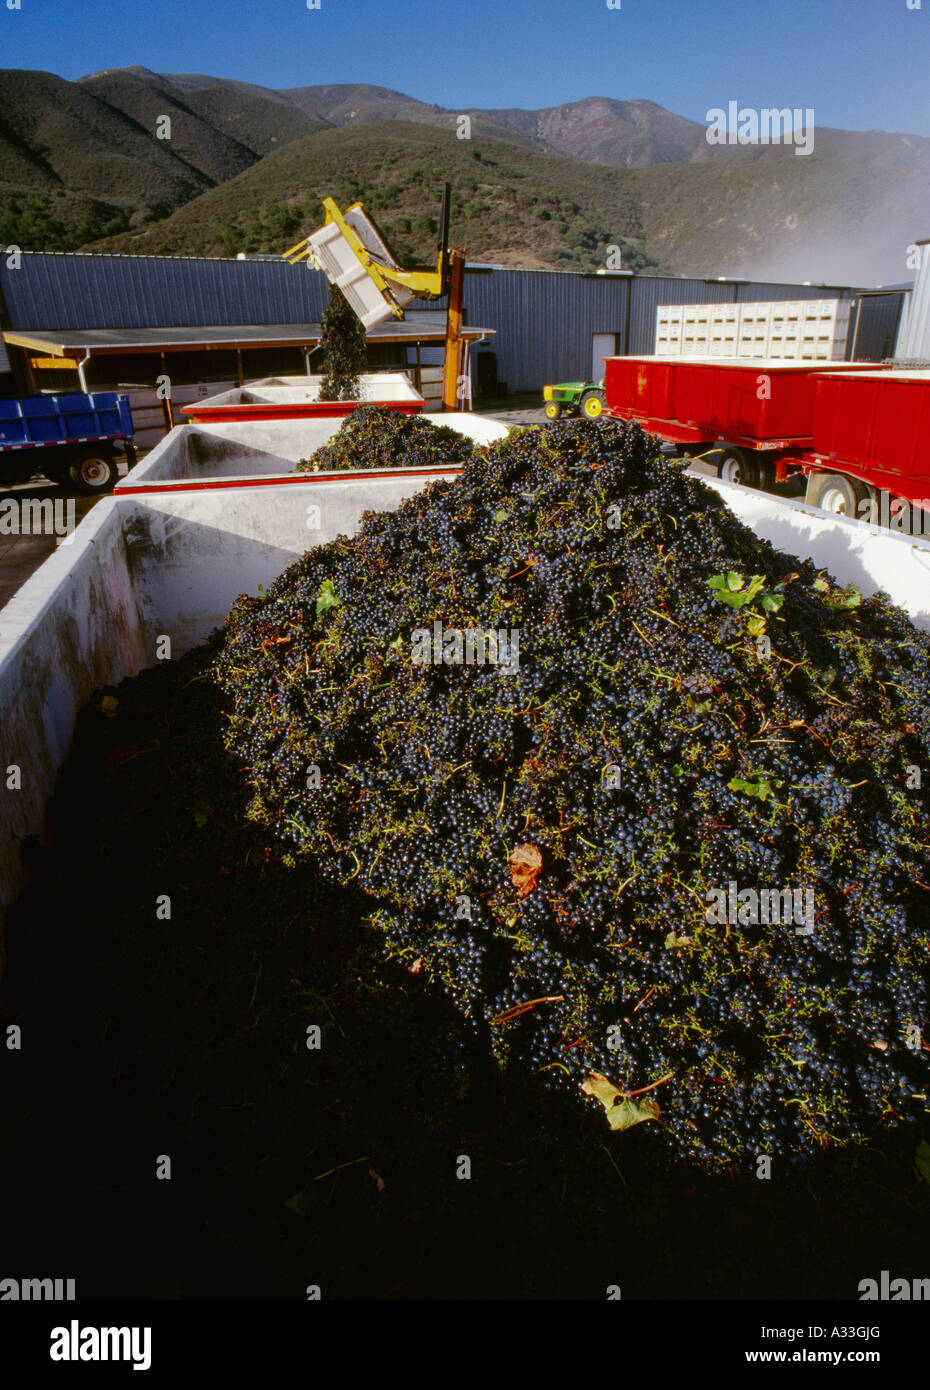 Freshly harvested Merlot wine grapes in bins on a truck being prepared for transport to a winery / Monterey County, CA, USA. Stock Photo